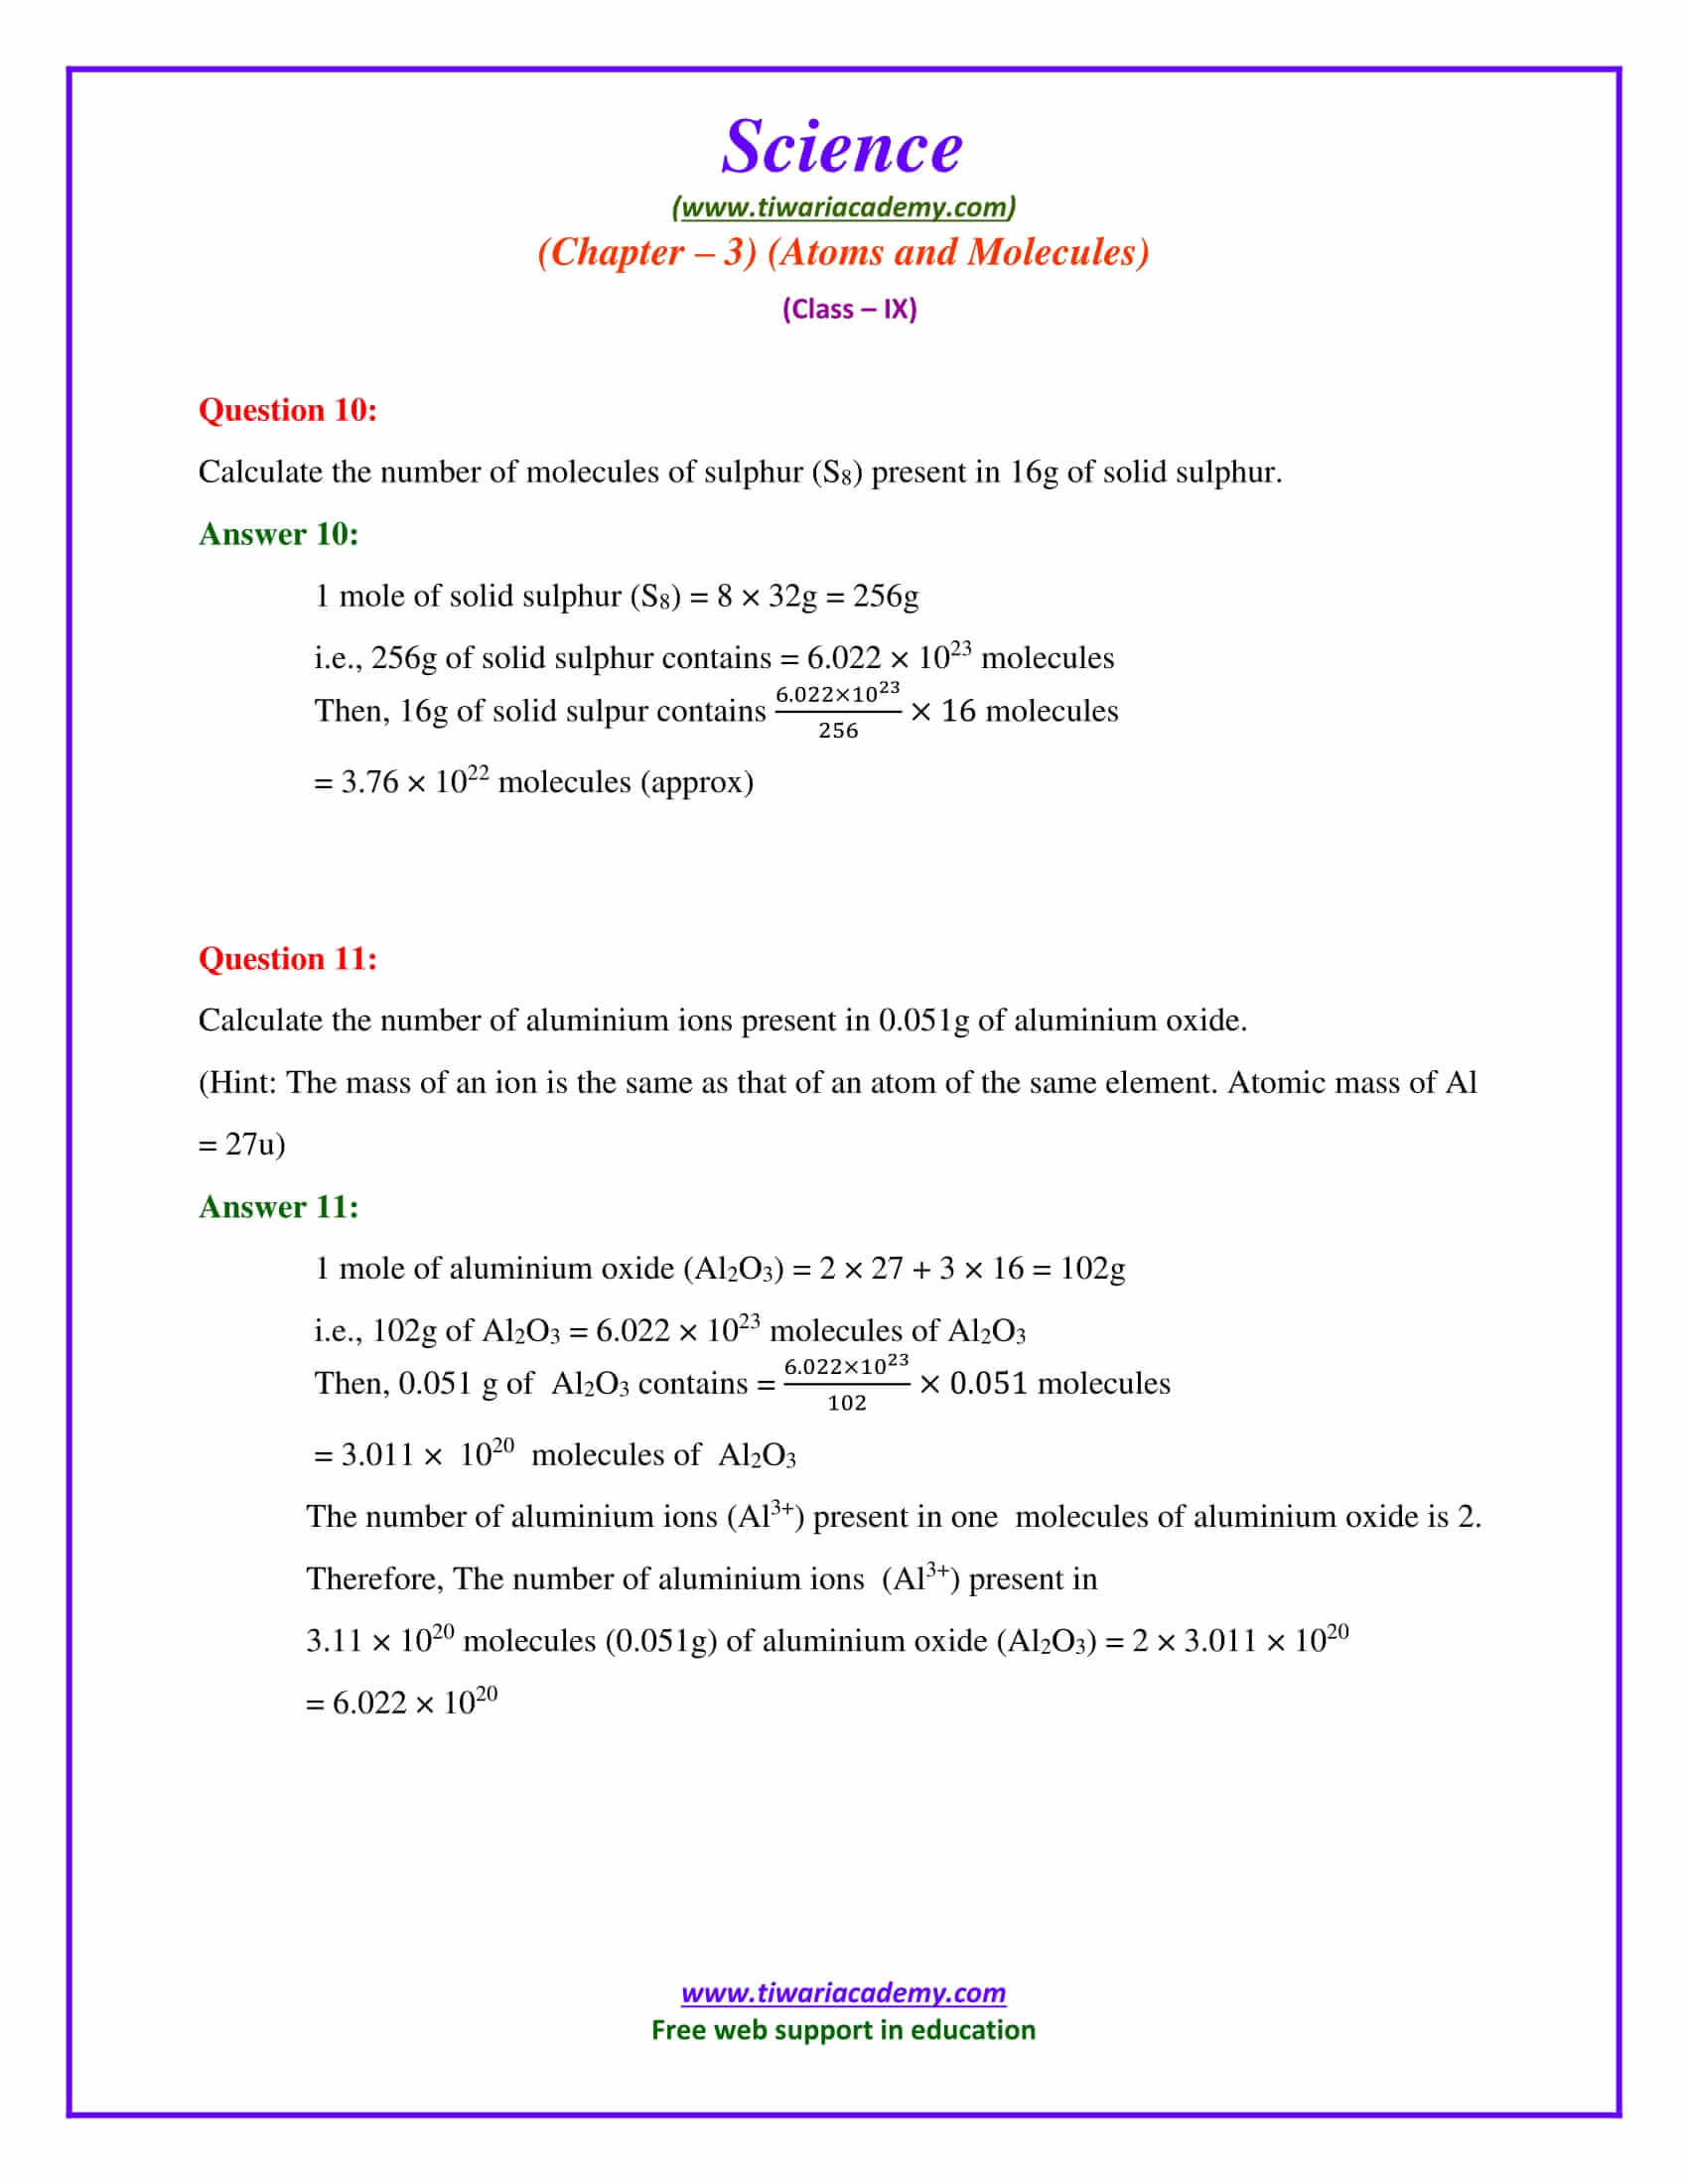 NCERT Solutions for Class 9 Science Chapter 3 Atoms and Molecules in pdf